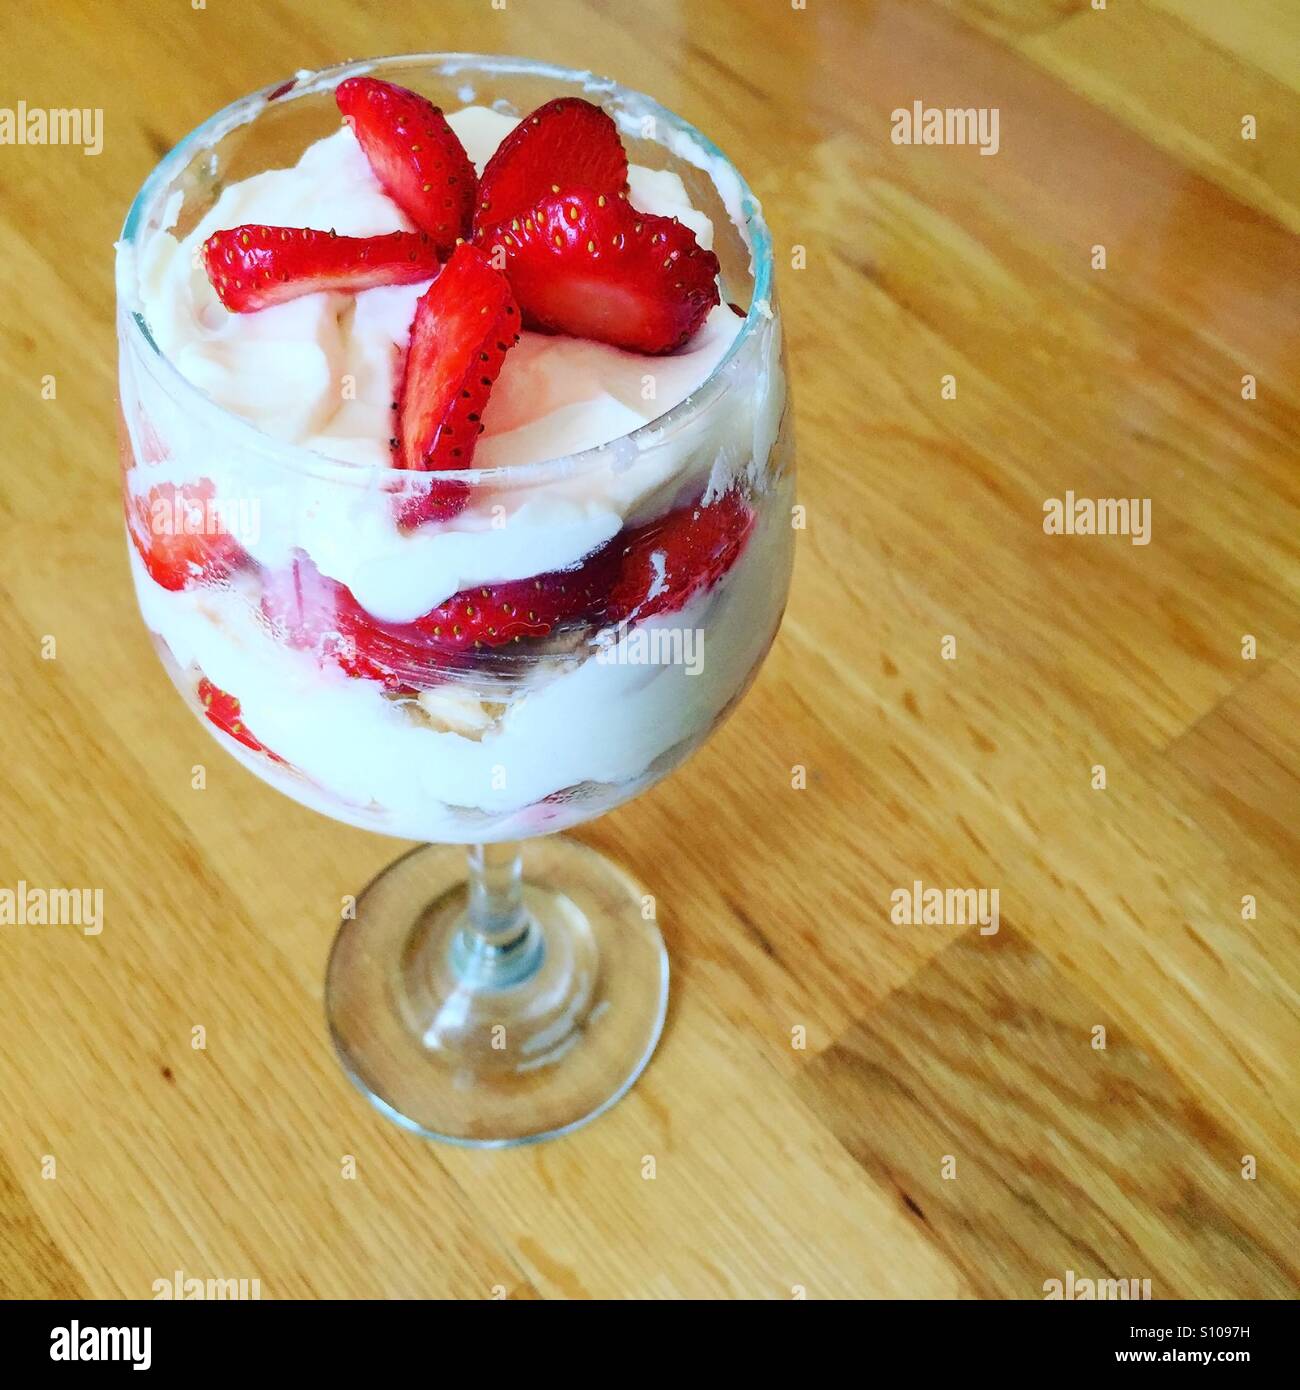 Strawberries with cream dessert in glass on wooden background Stock Photo